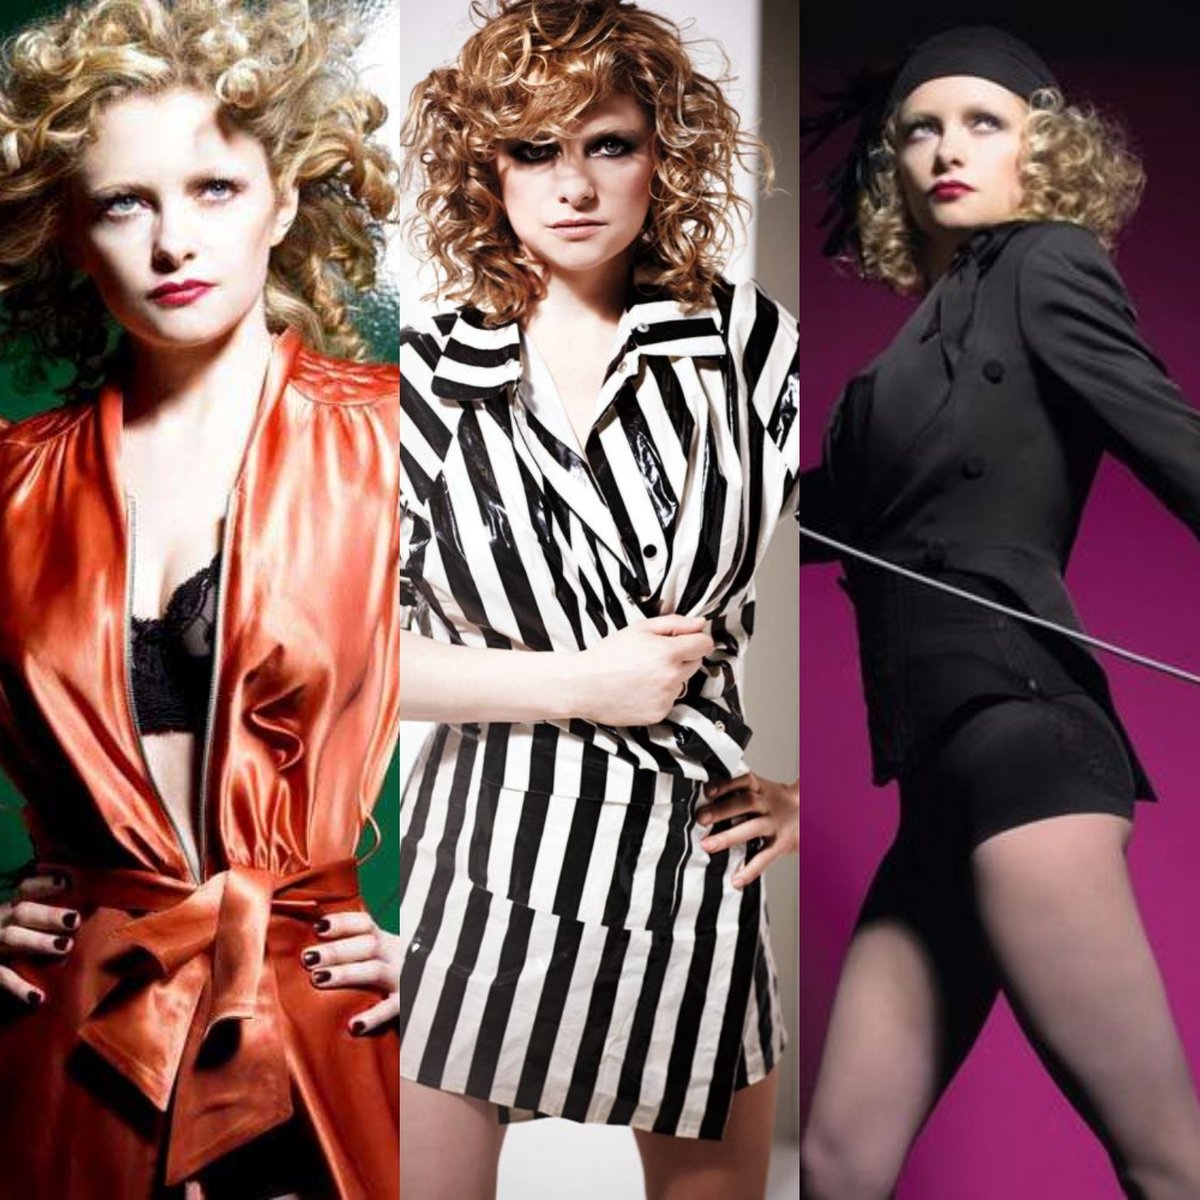 Happy birthday to the one and only #AlisonGoldfrapp What are your favourite Goldfrapp tracks, solo songs and collaborations?